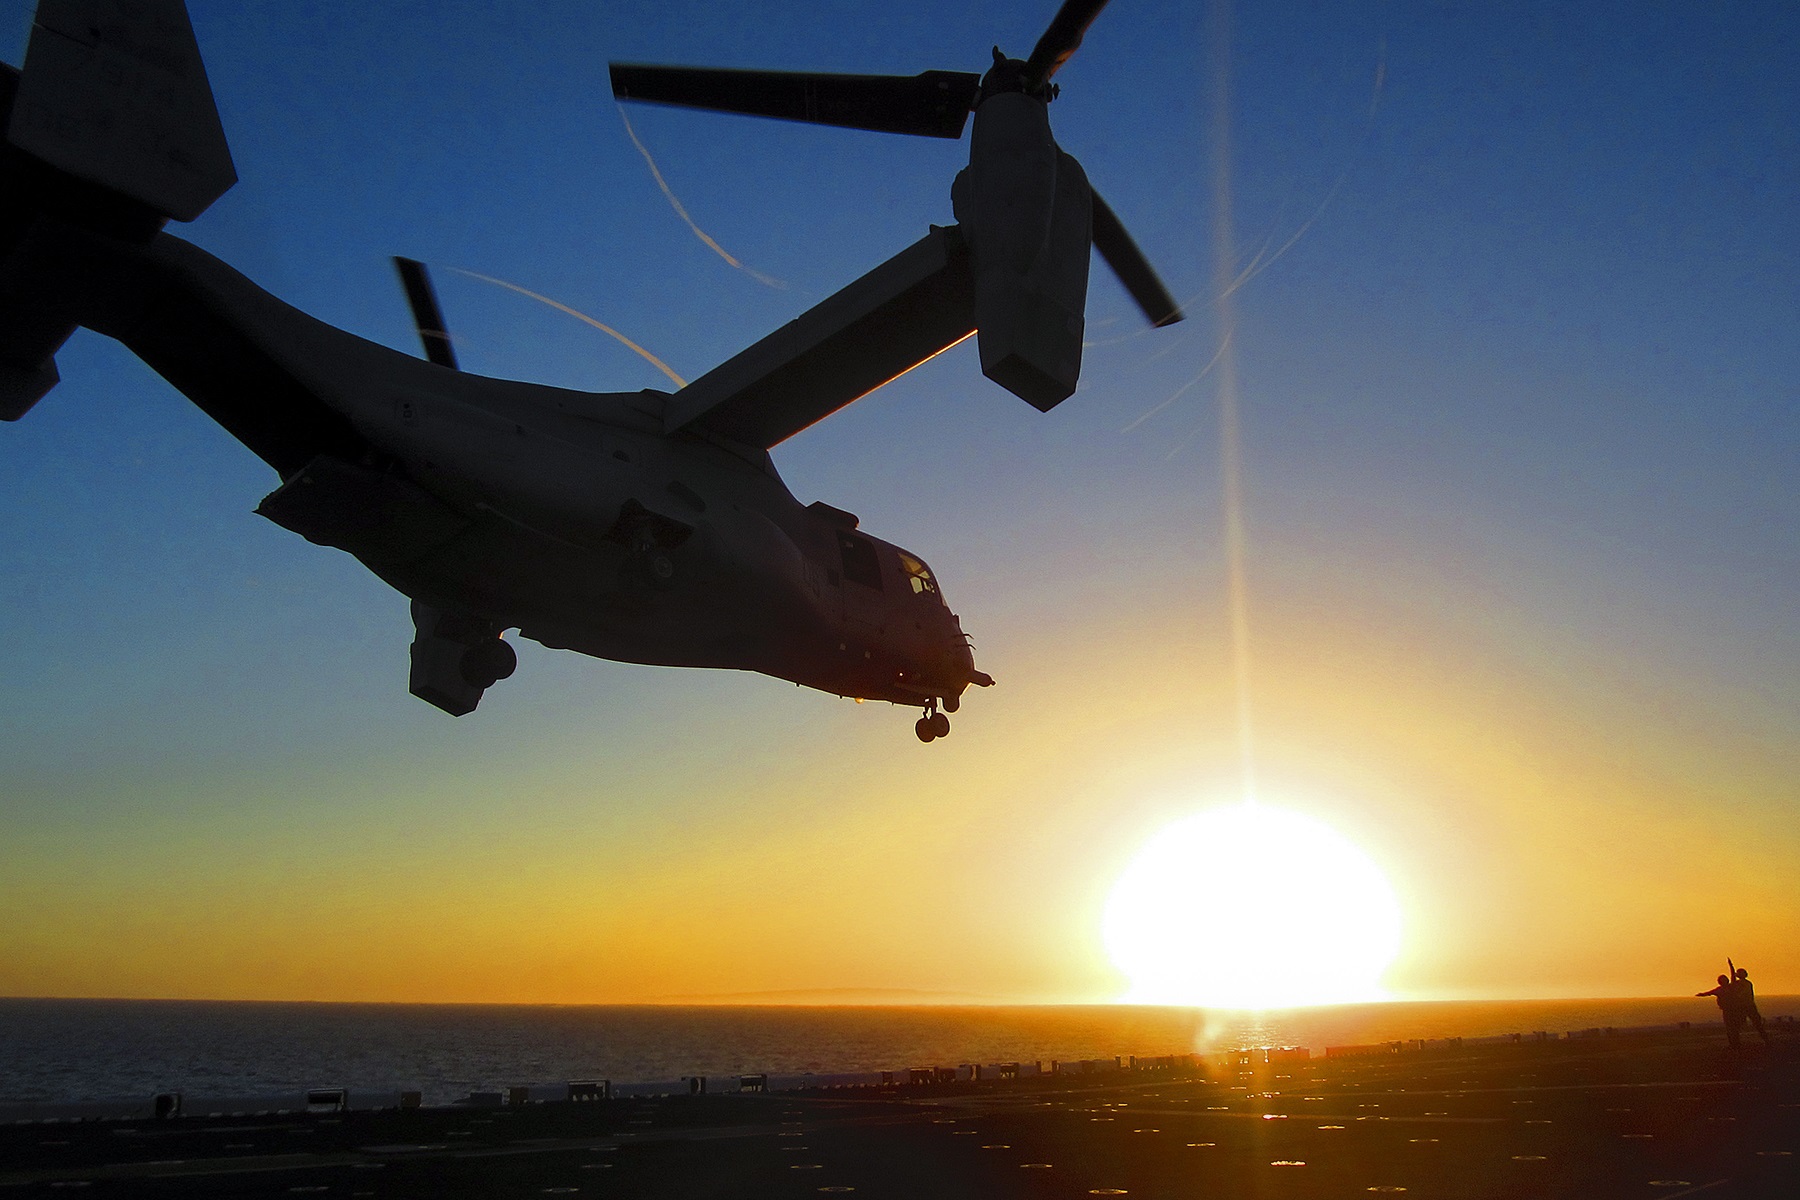 An MV-22 Osprey tilt-rotor aircraft lands on the amphibious assault ship USS America at sunset during deck-landing qualifications in the Pacific Ocean, April 27, 2015. U.S. Marine Corps photo by Chief Warrant Officer 4 Shane Duhe